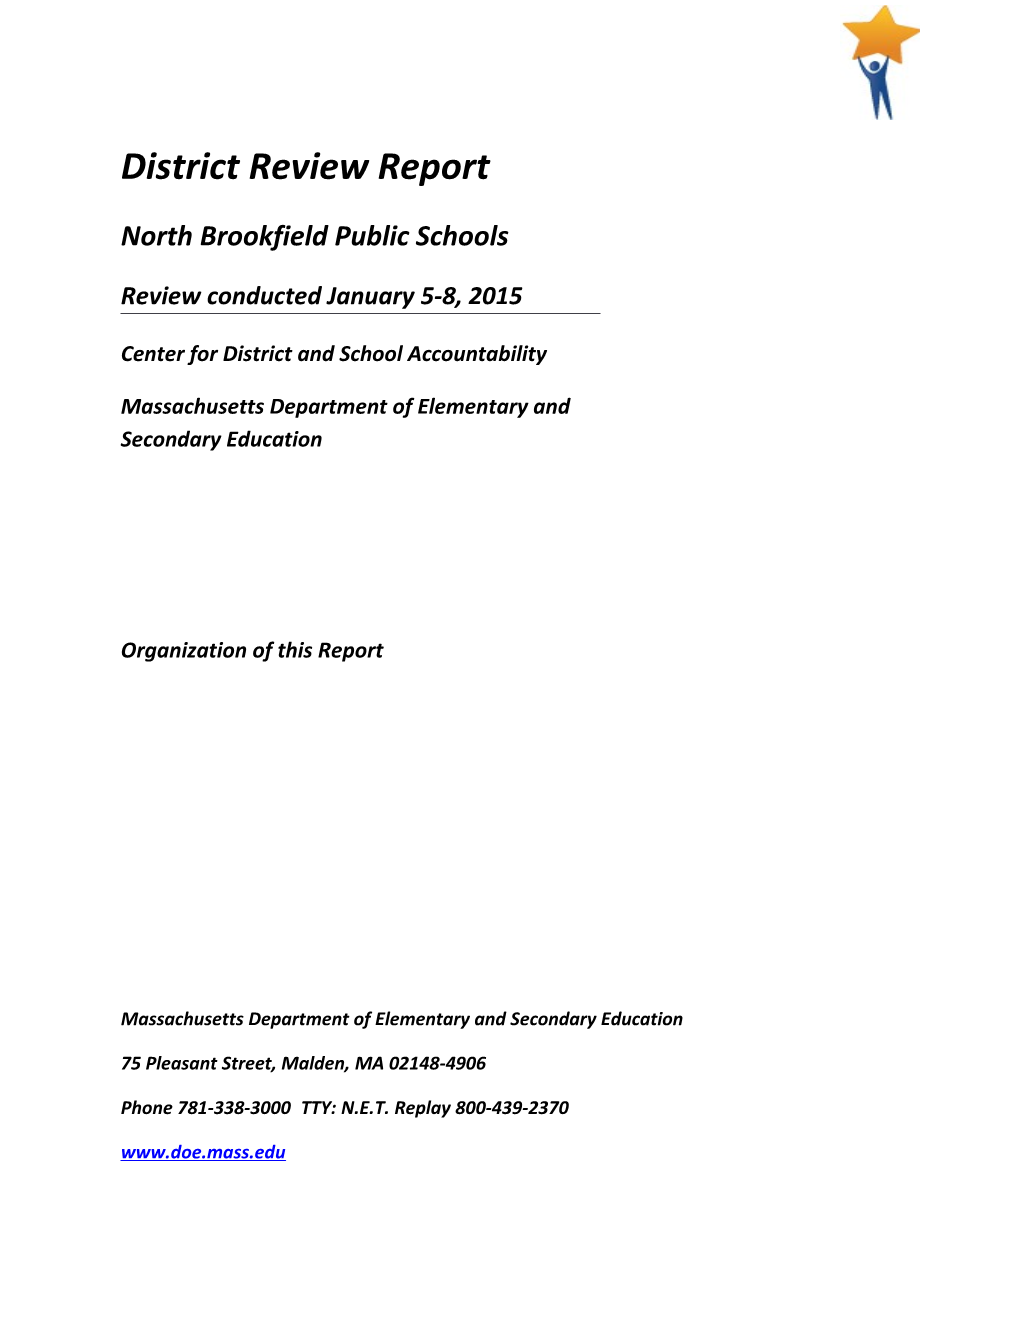 North Brookfield District Review Report, 2015